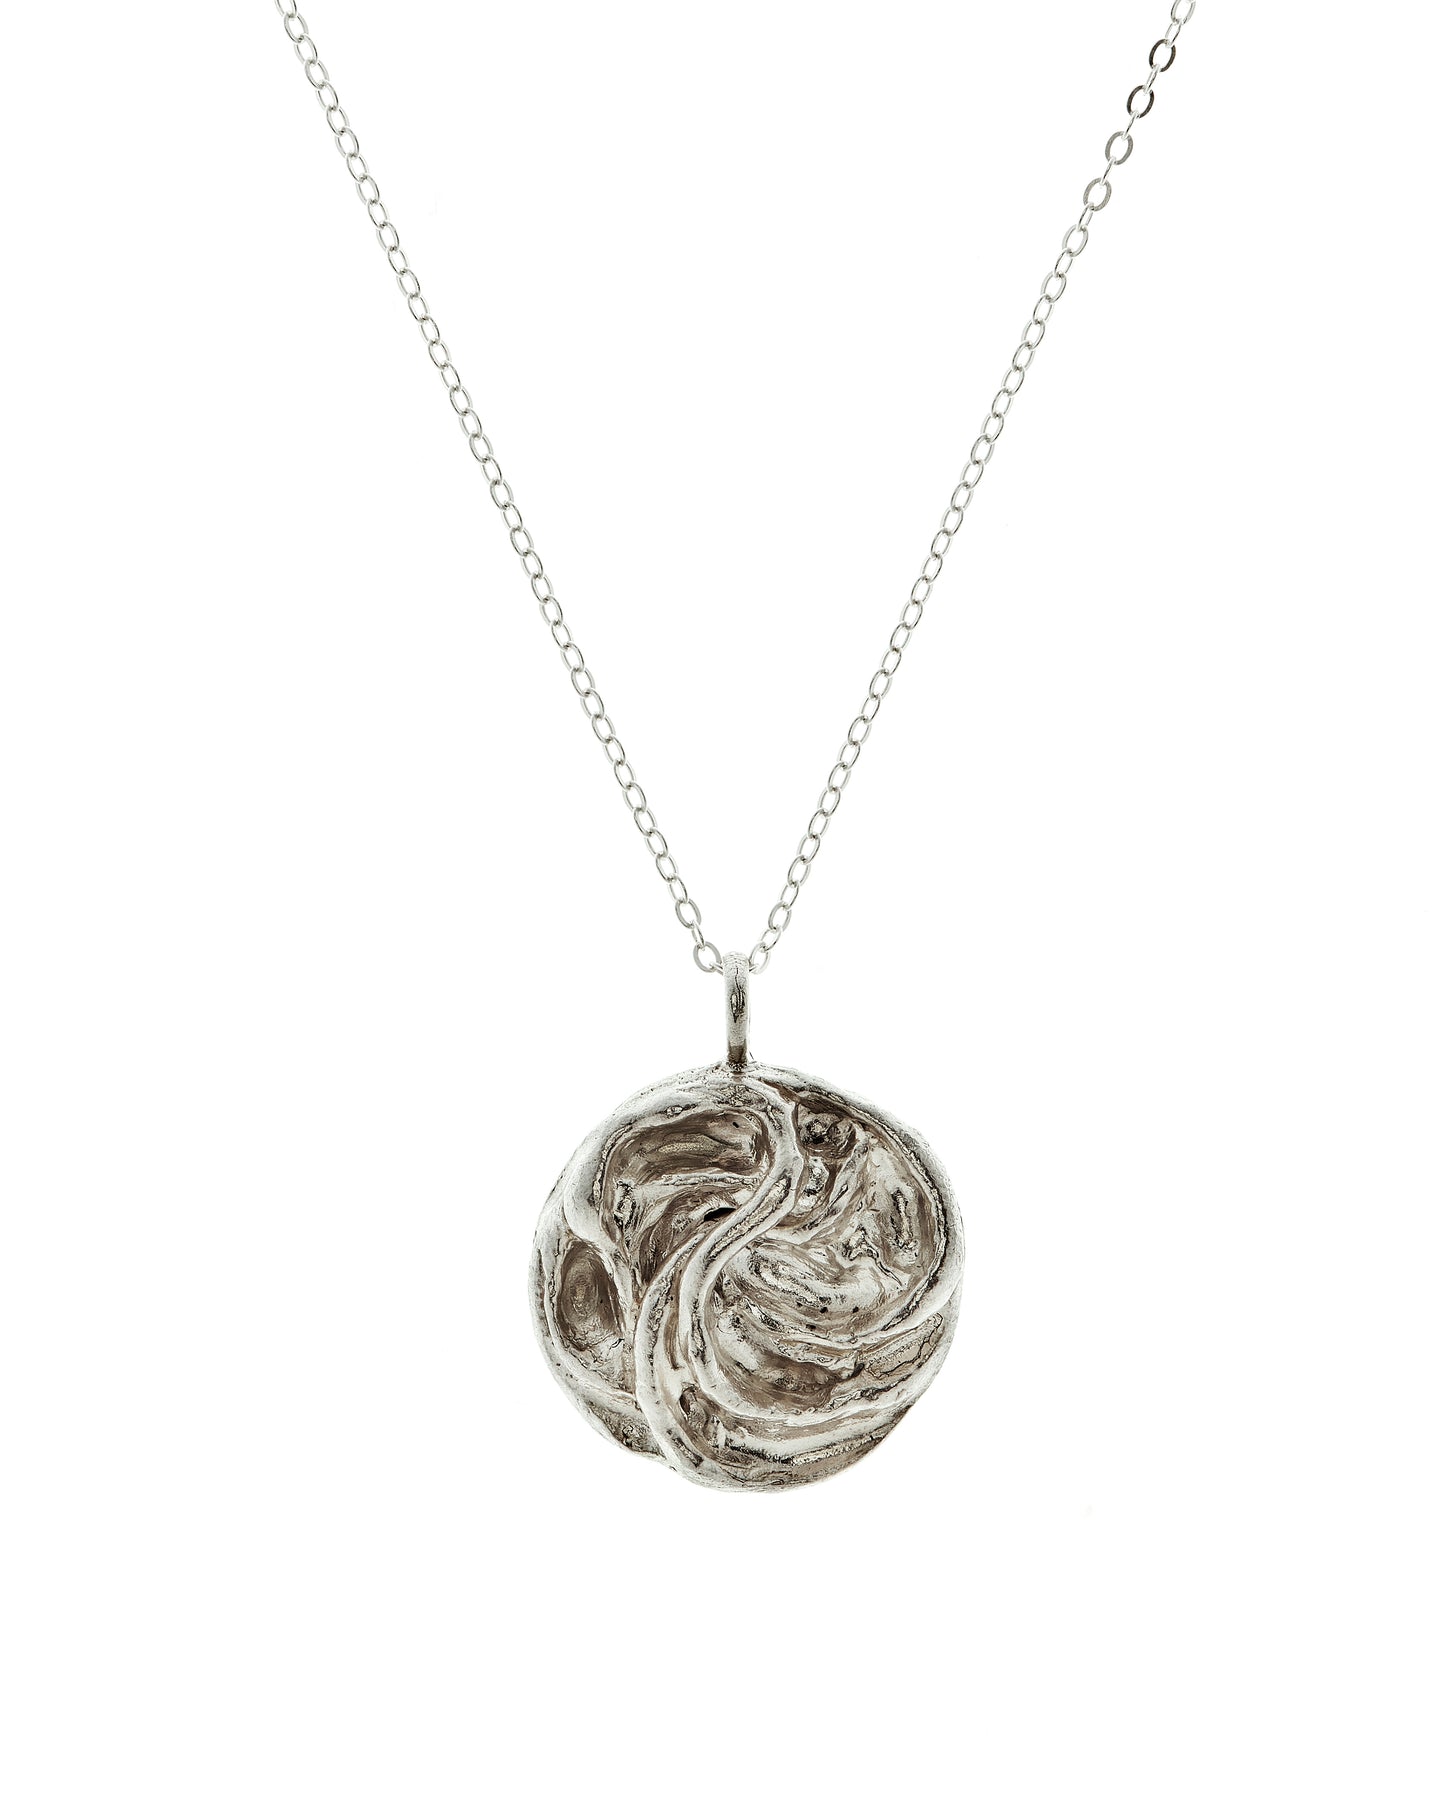 Sterling silver triskele pendant and chain